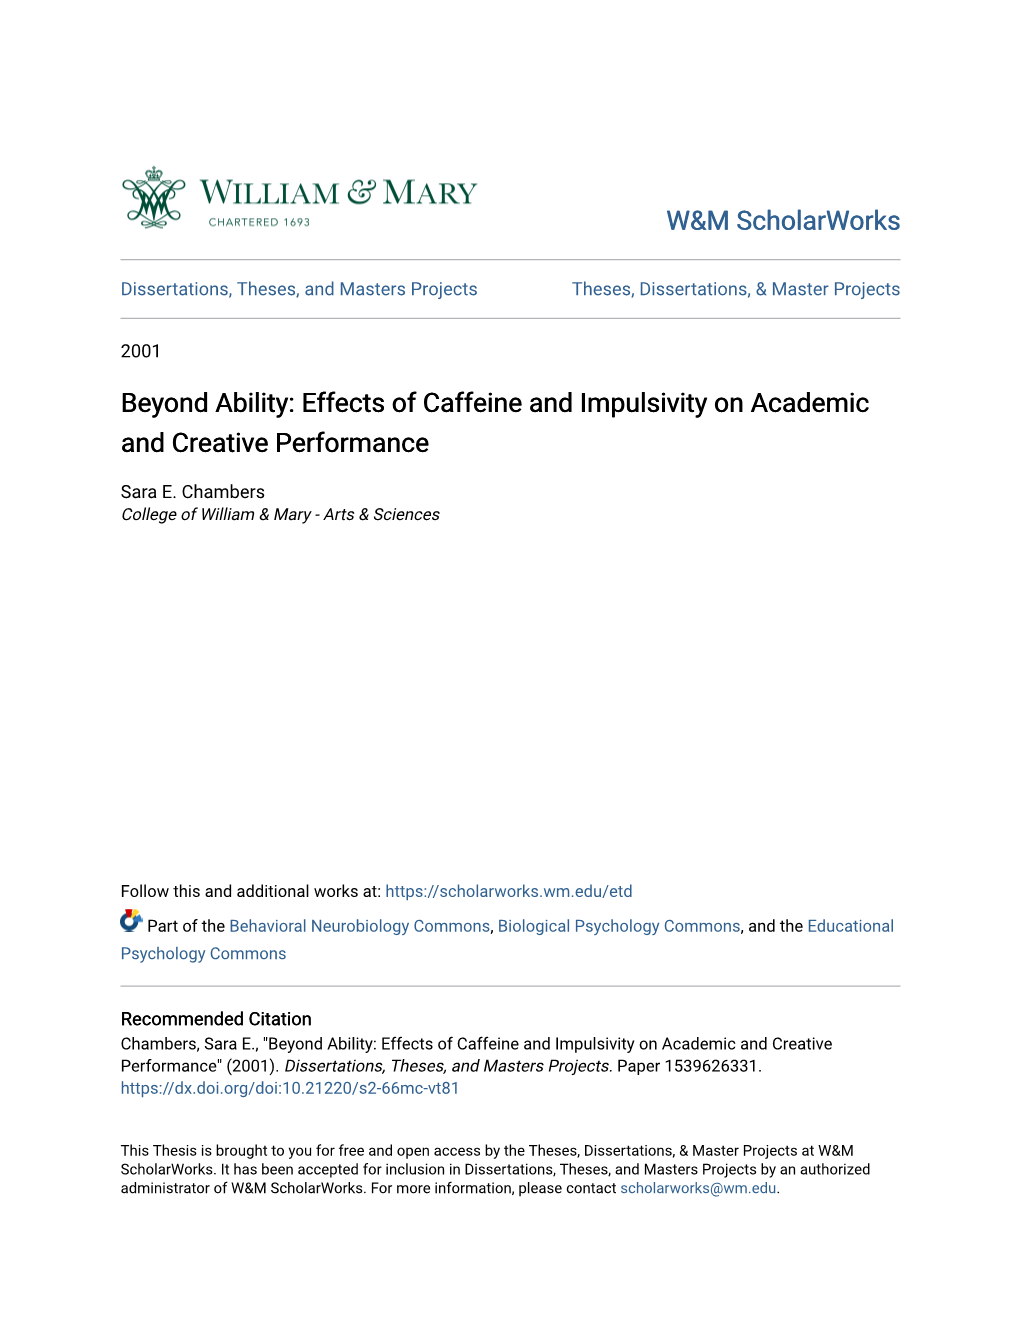 Effects of Caffeine and Impulsivity on Academic and Creative Performance